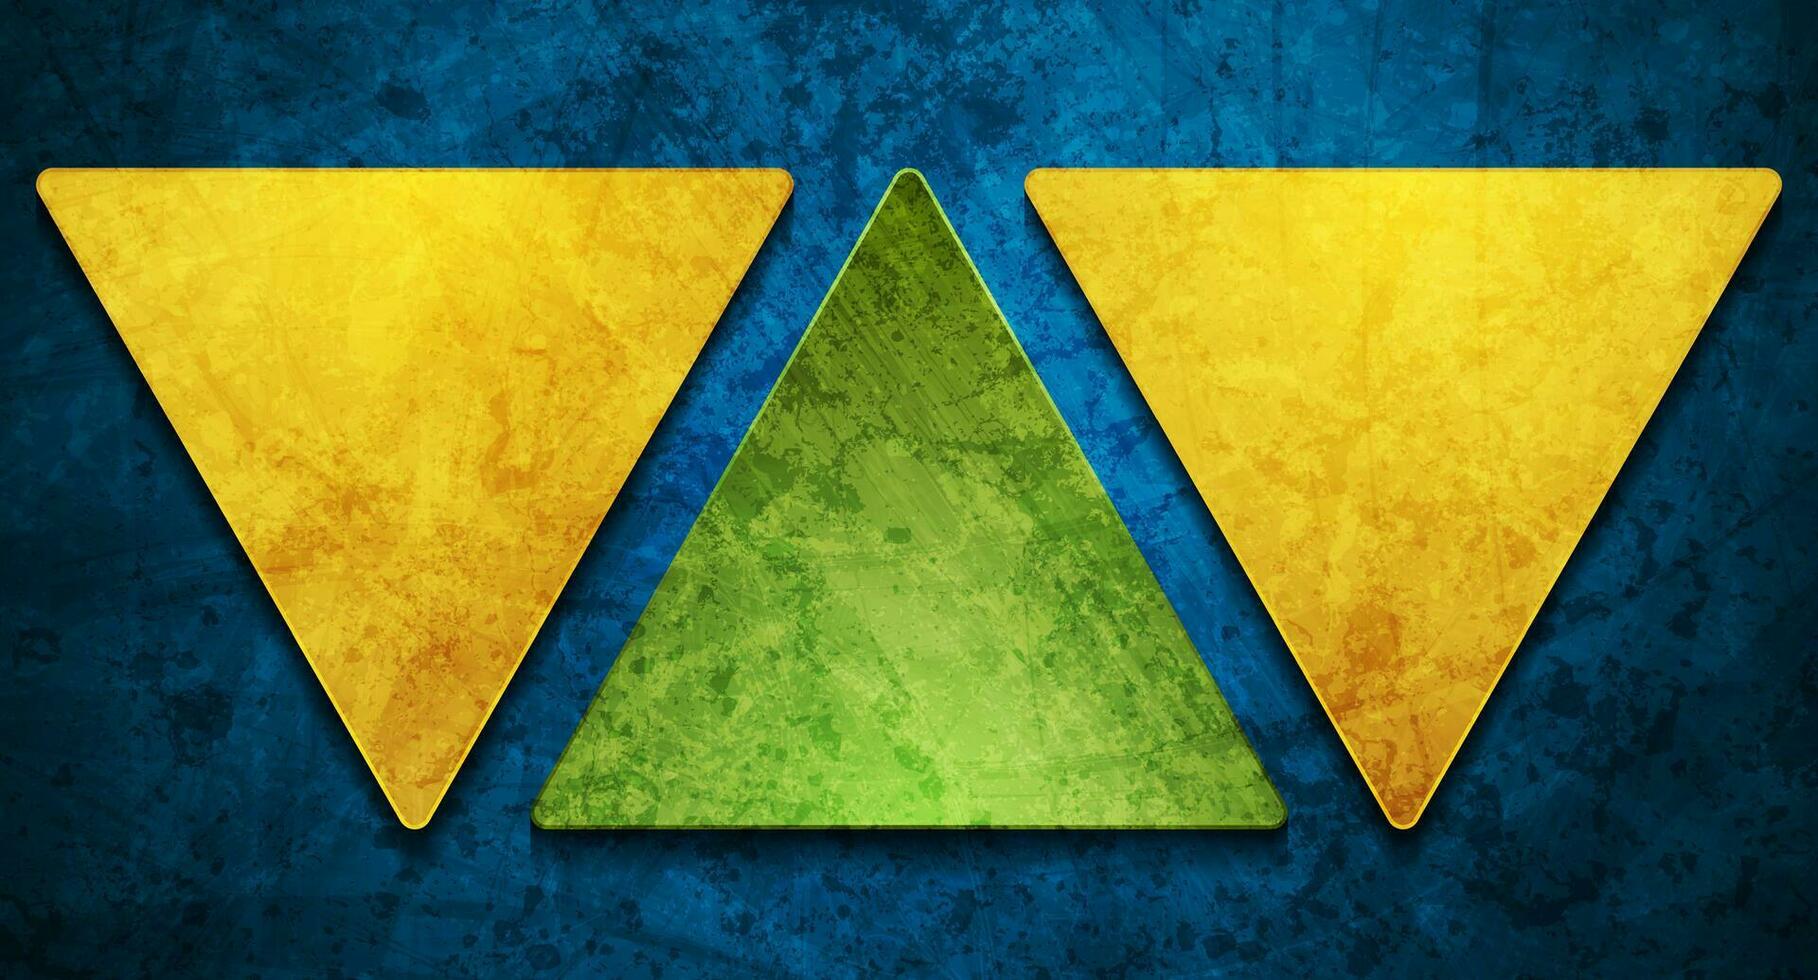 Green and yellow triangles abstract grunge background vector